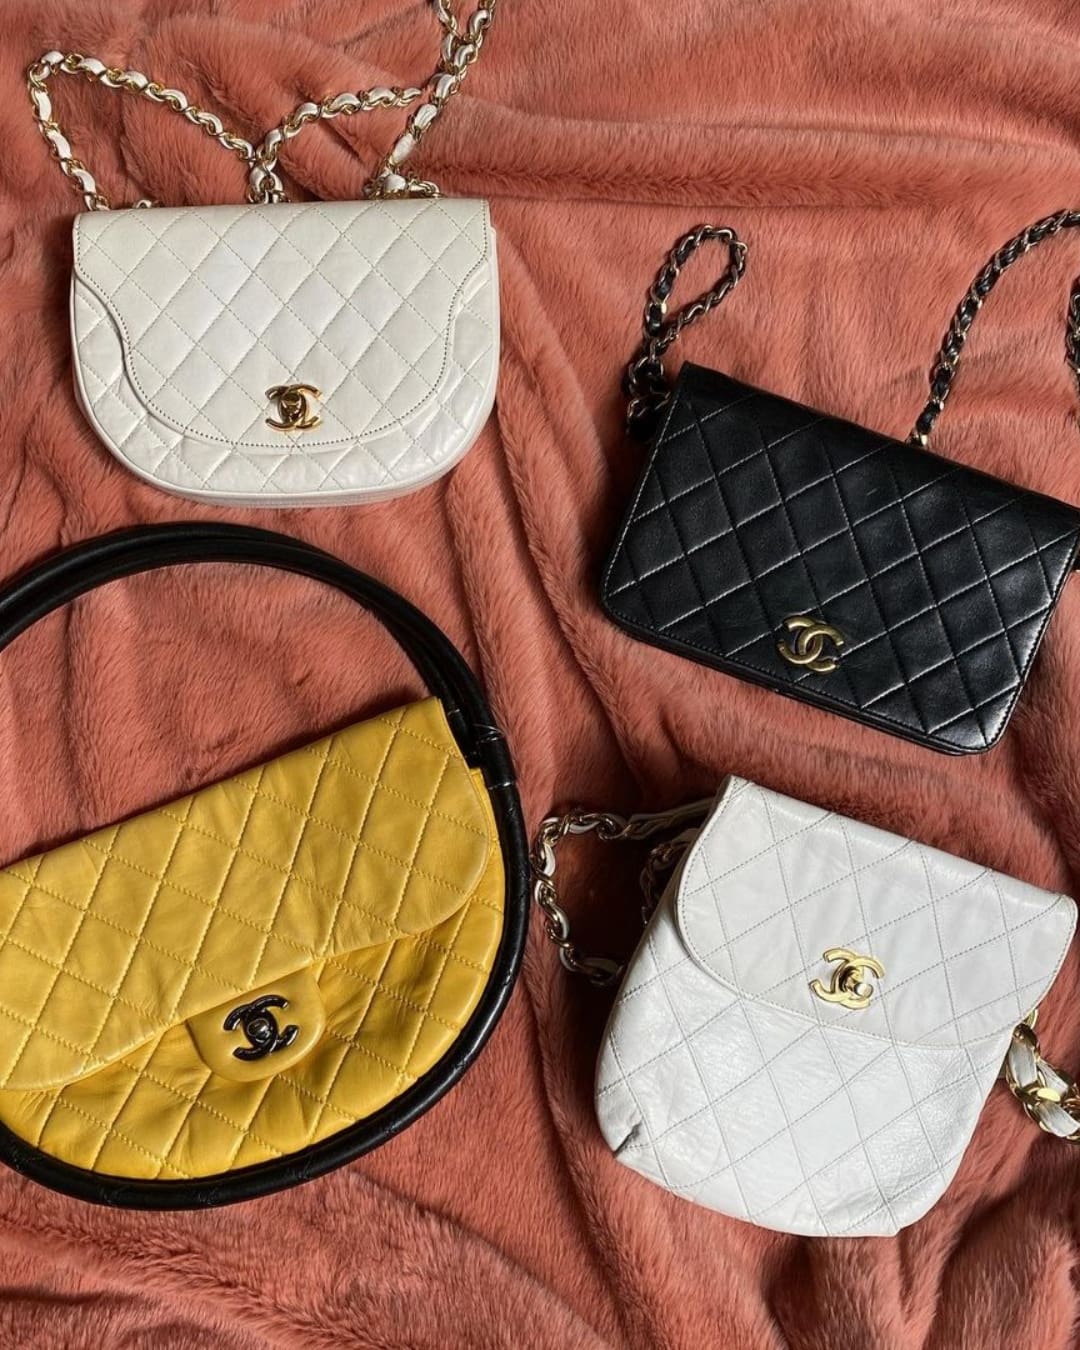 The best vintage stores in LA | Chanel handbags at Wasteland